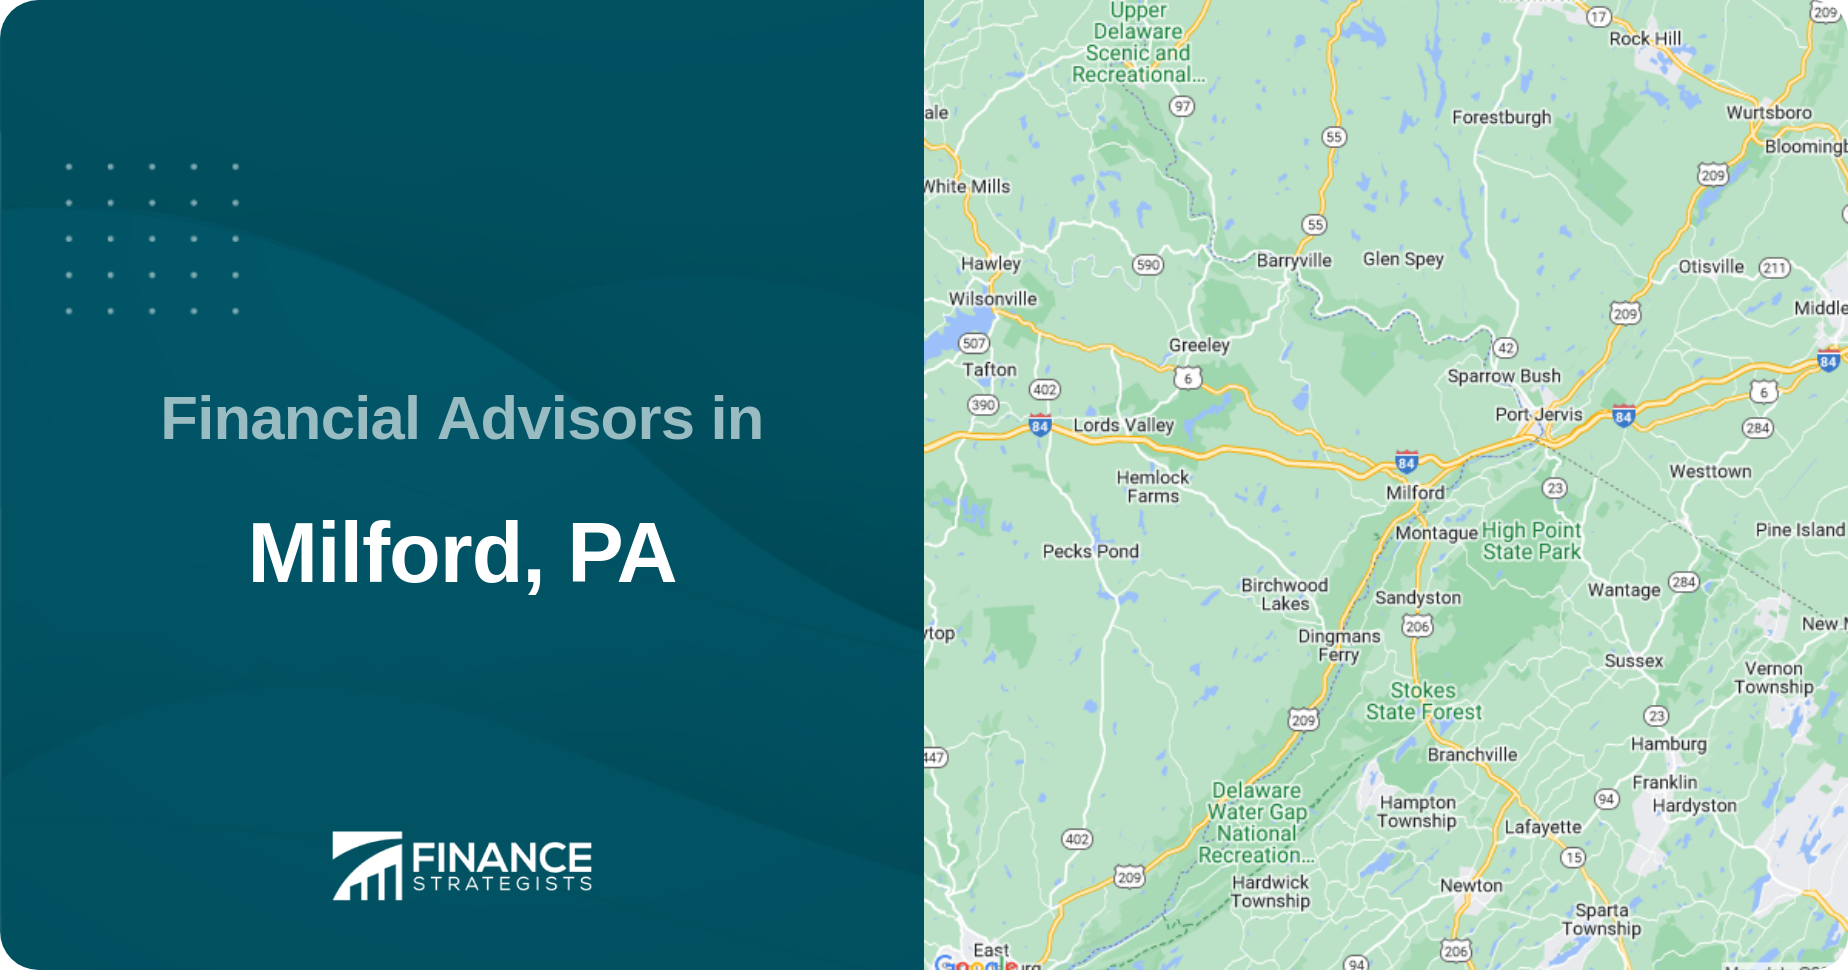 Financial Advisors in Milford, PA